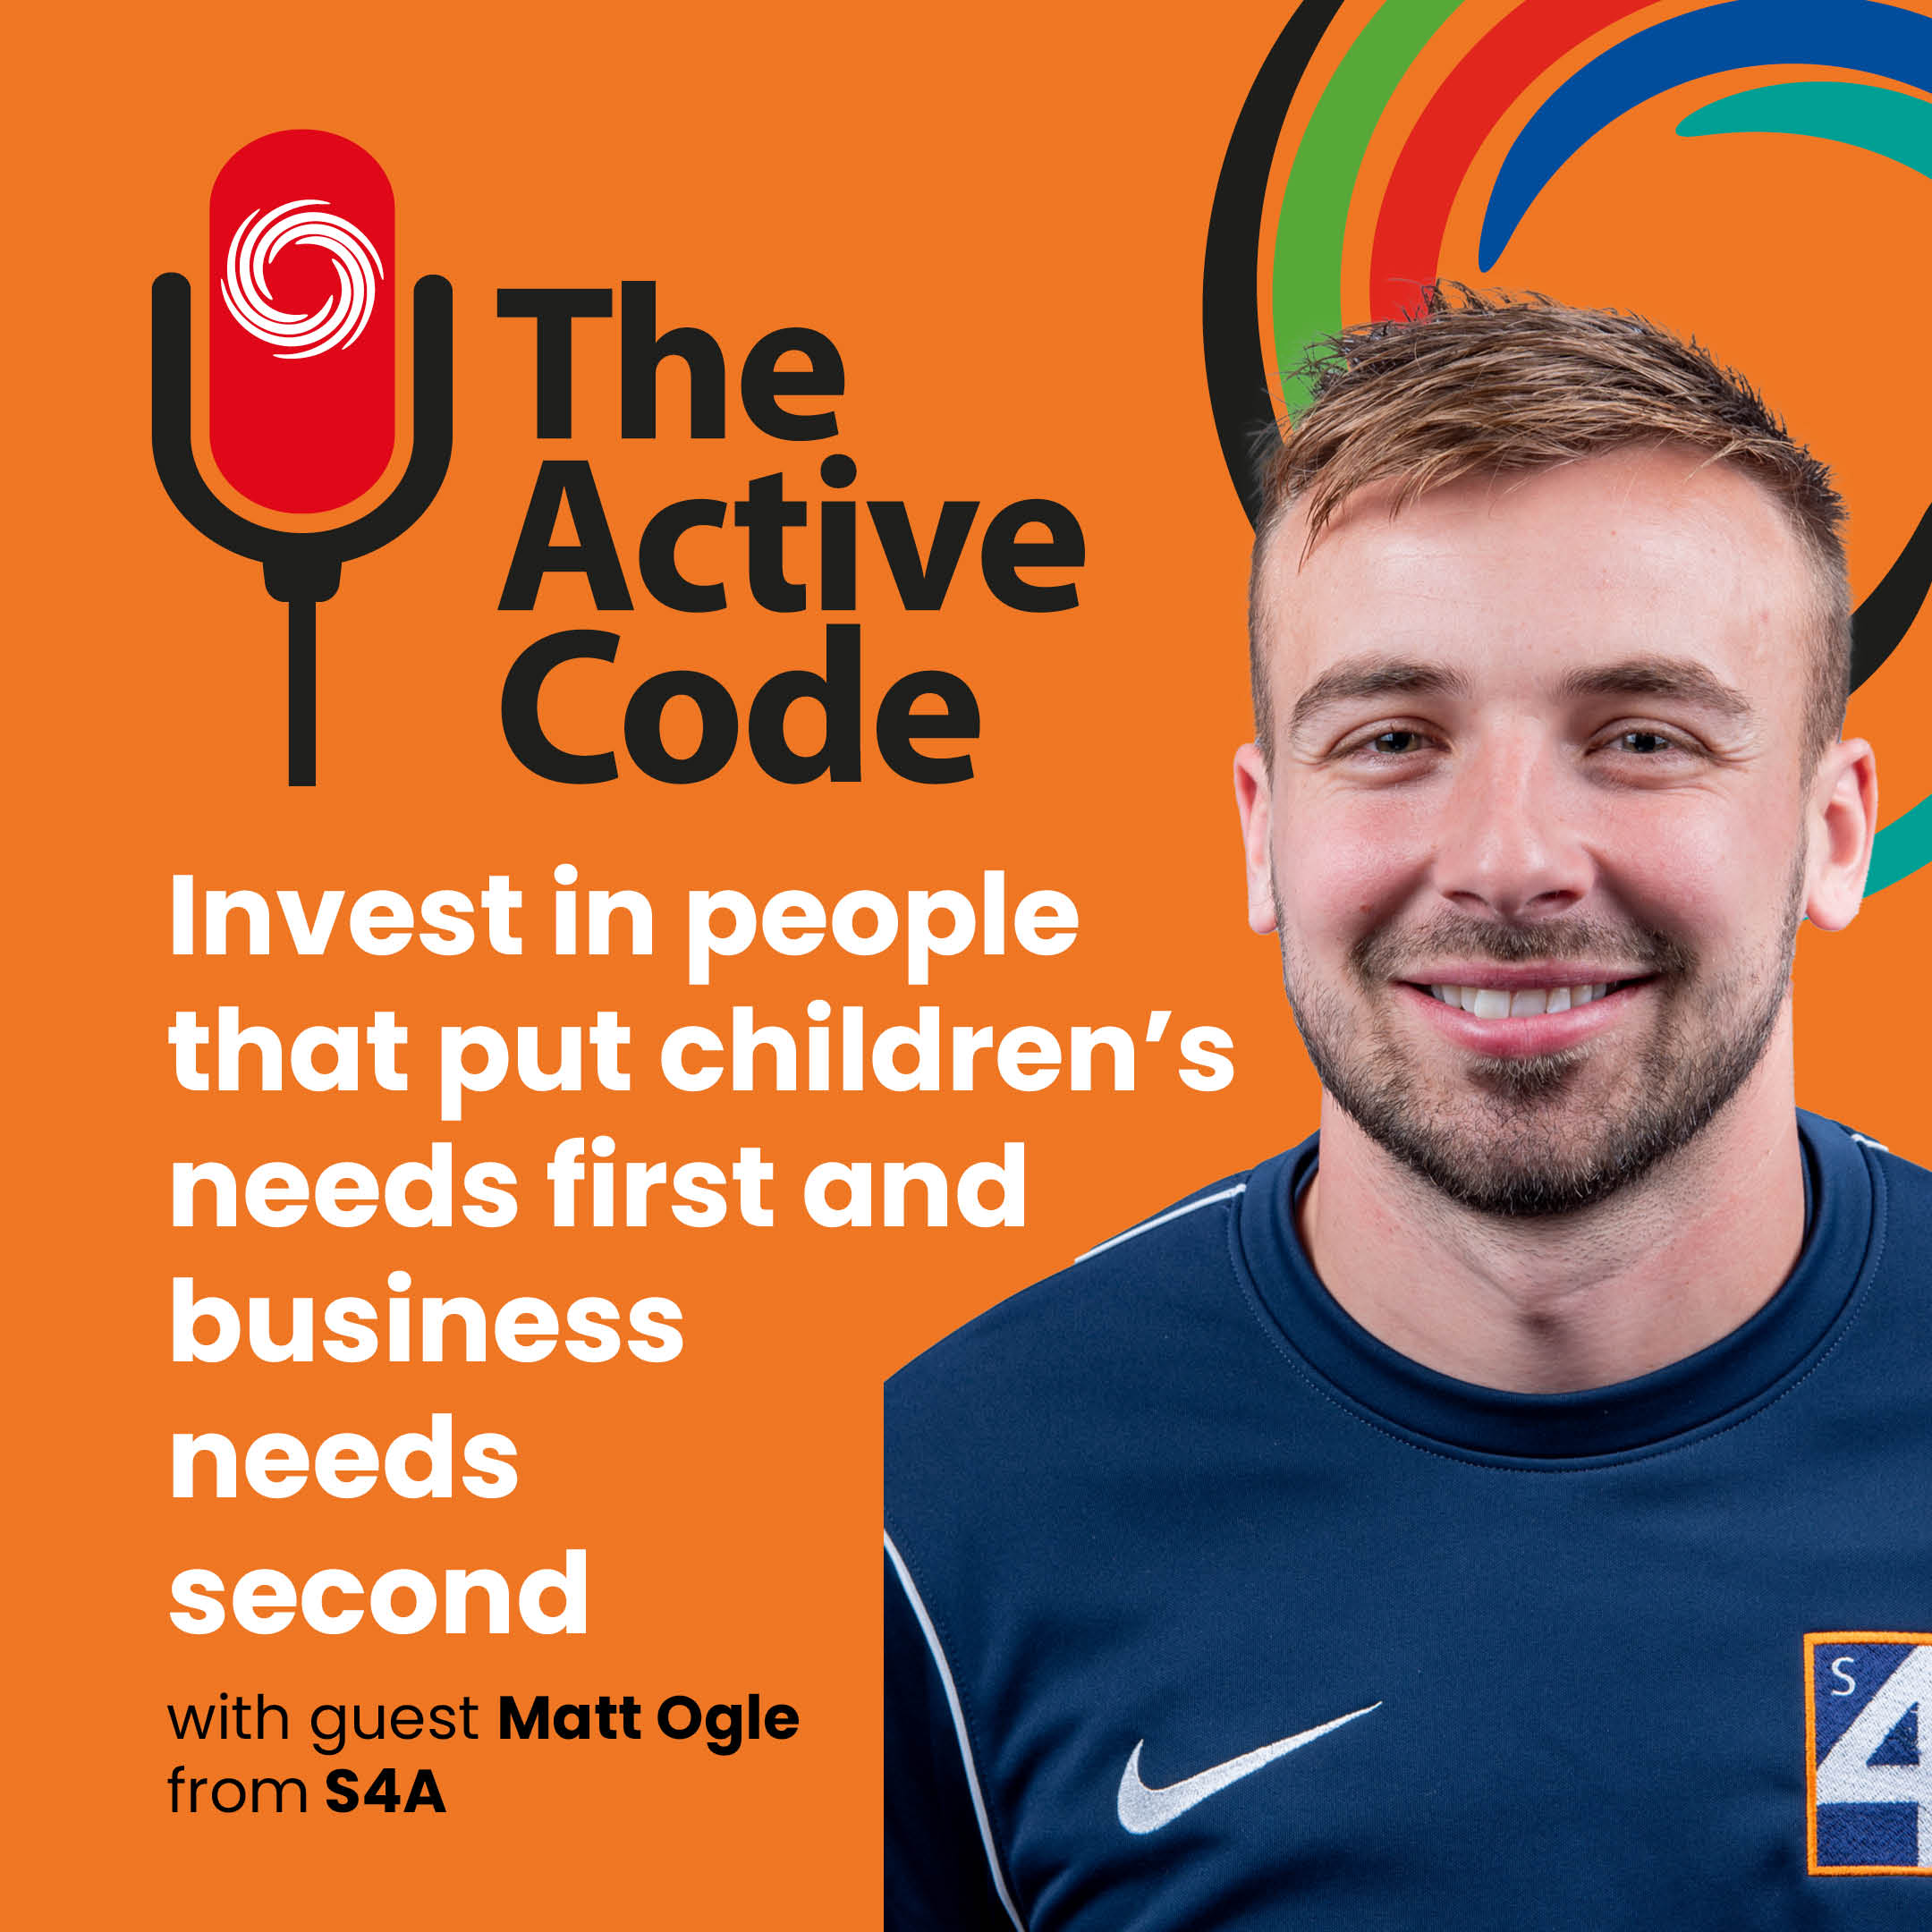 The Active Code – Invest in people that put children’s needs first and business needs second